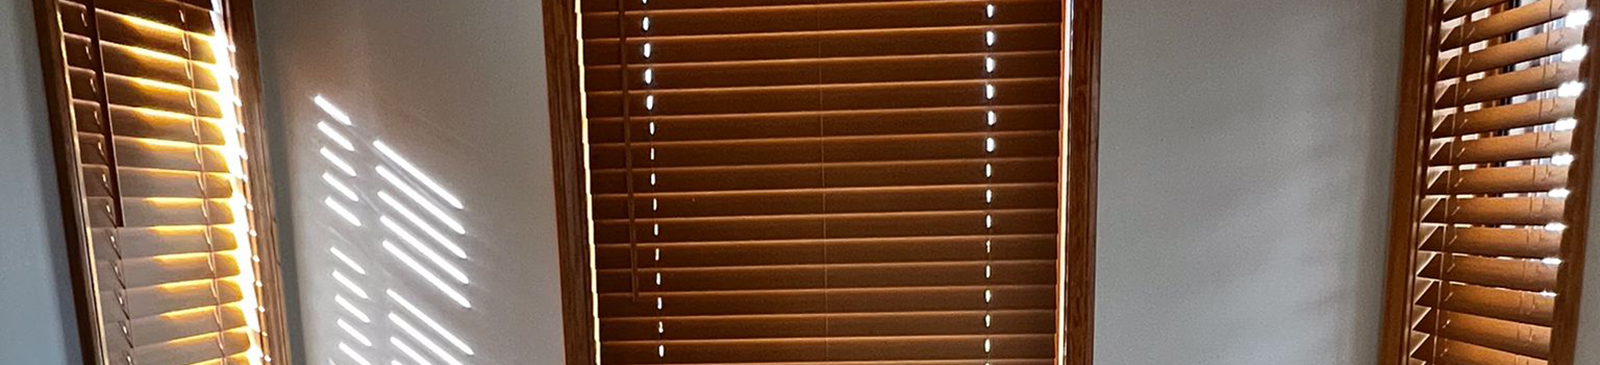 Faux Wood Blinds for Den Room in Thousand Oaks